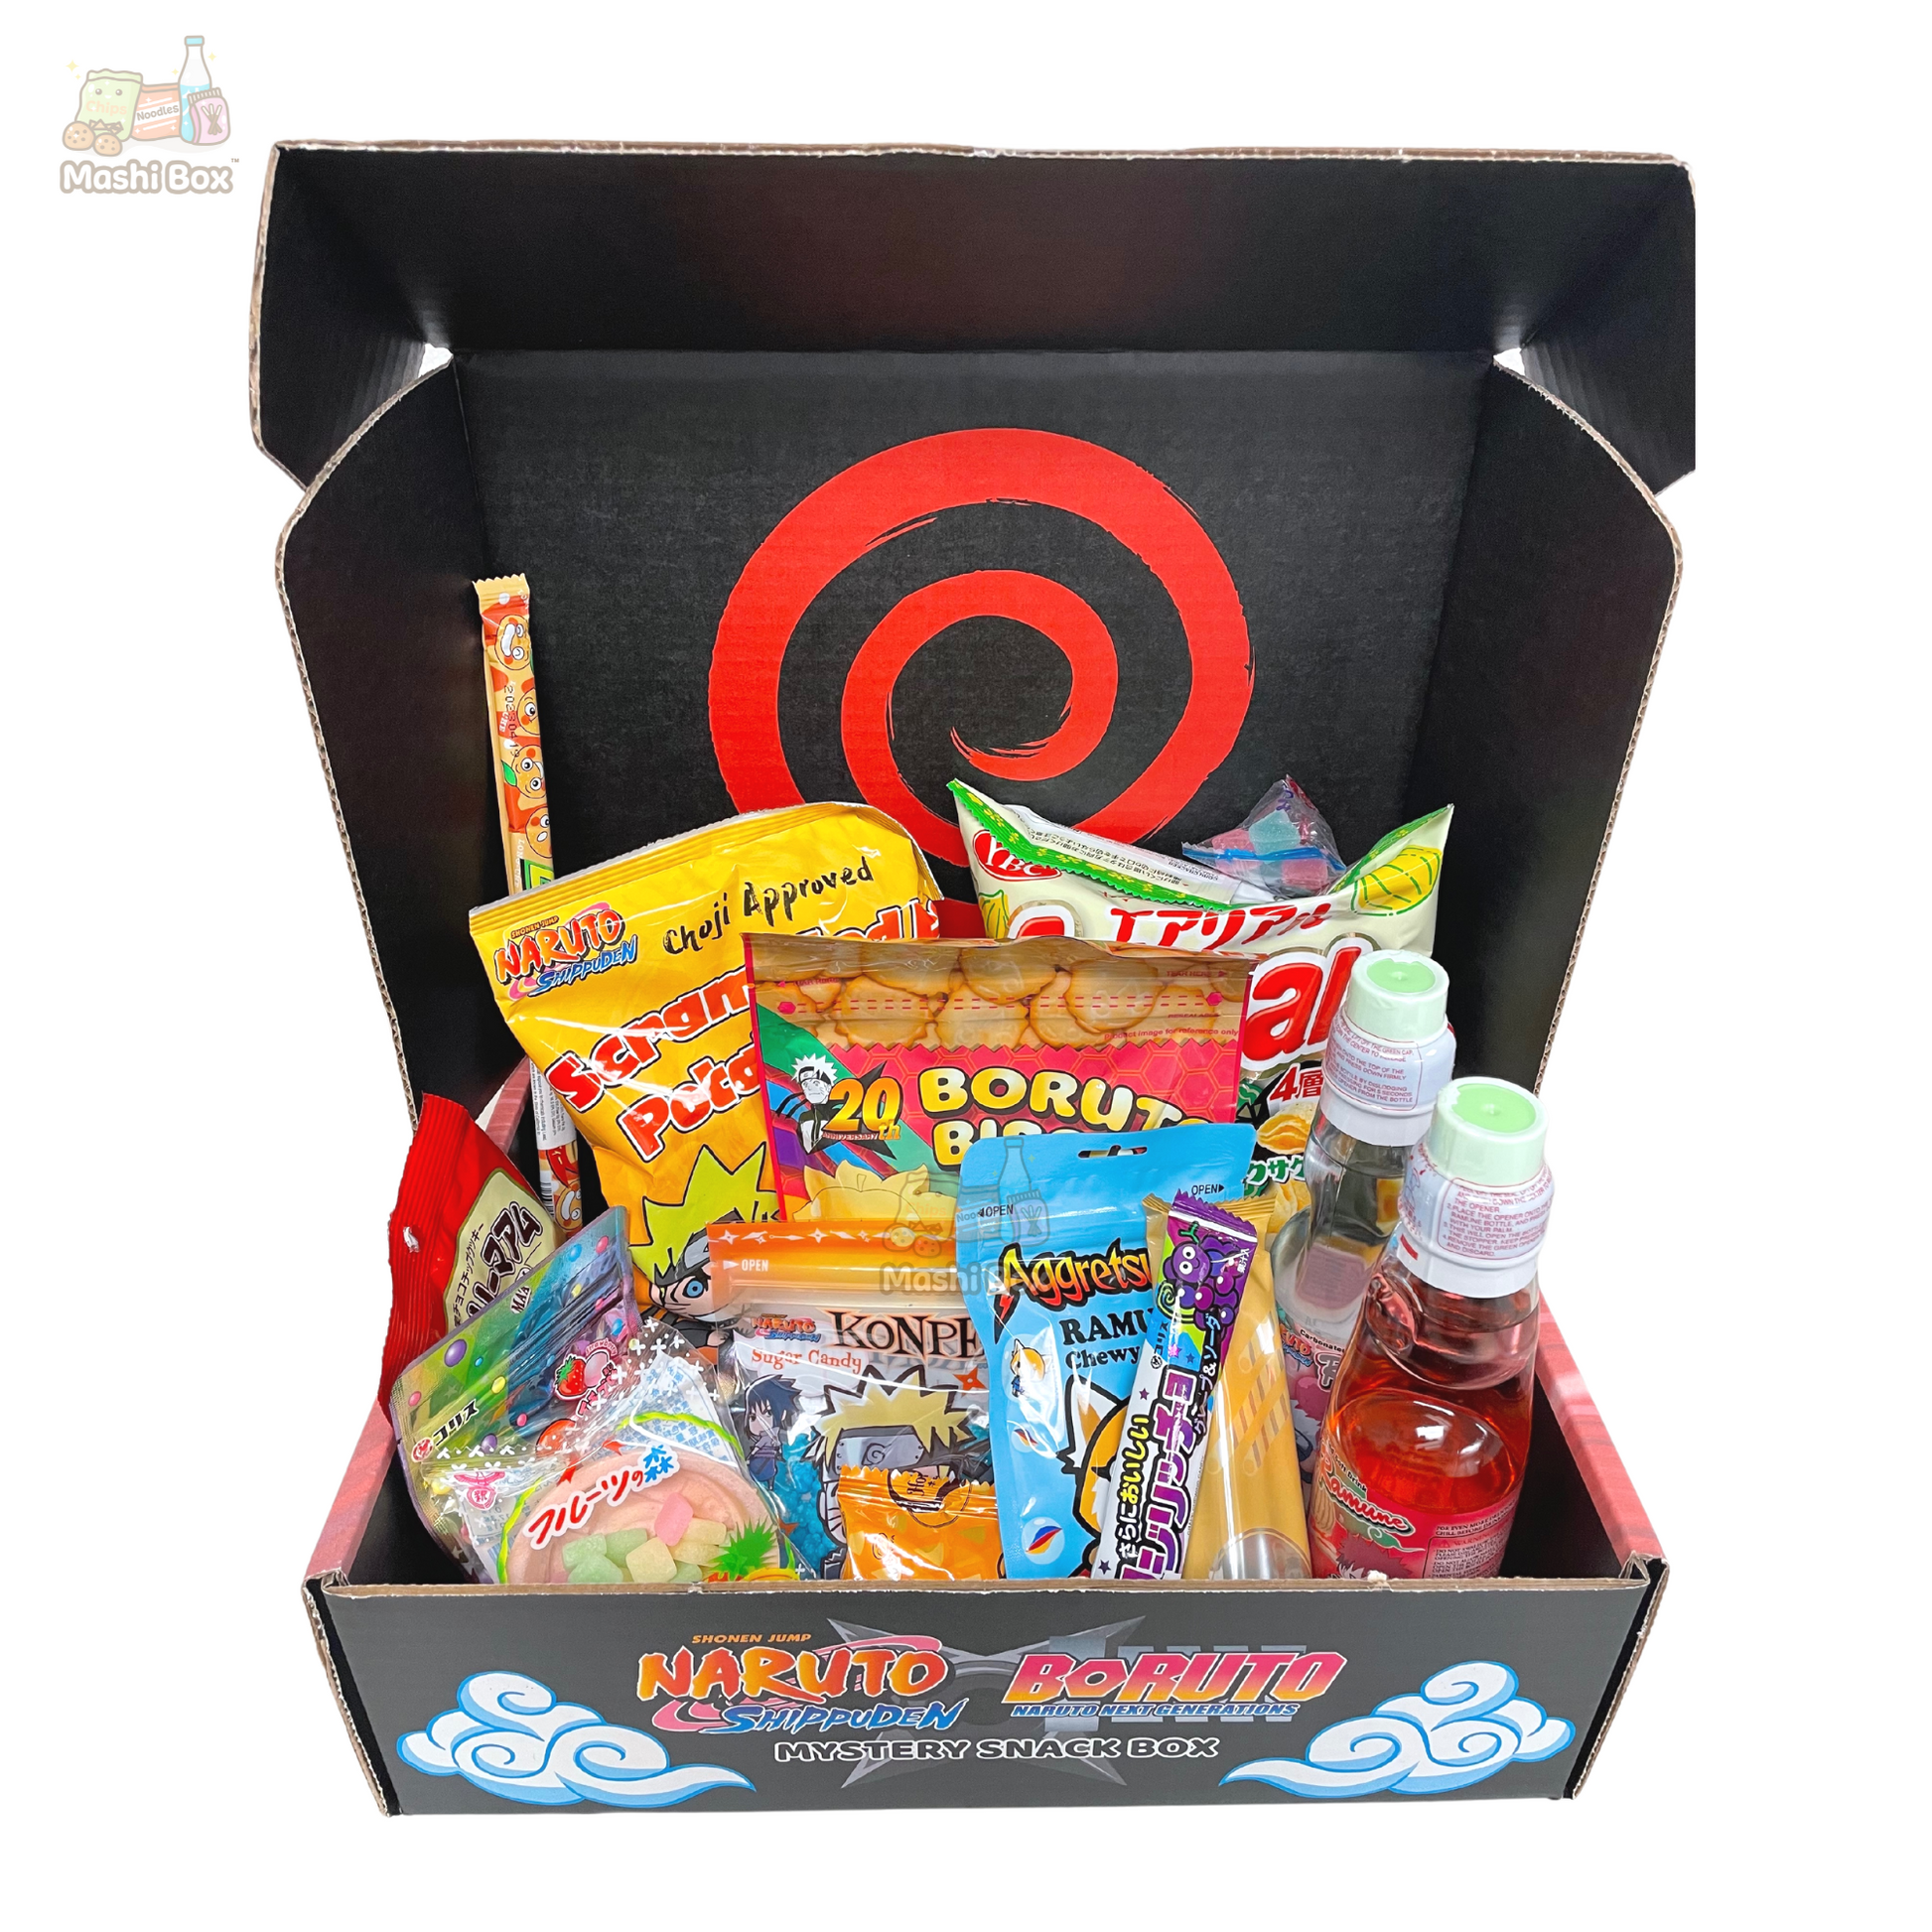  Asian Food Grocer NARUTO Snack Box - 1 to 2 Bottles of NARUTO &  BORUTO Ramunes + 13 to 14 Japan imported snacks